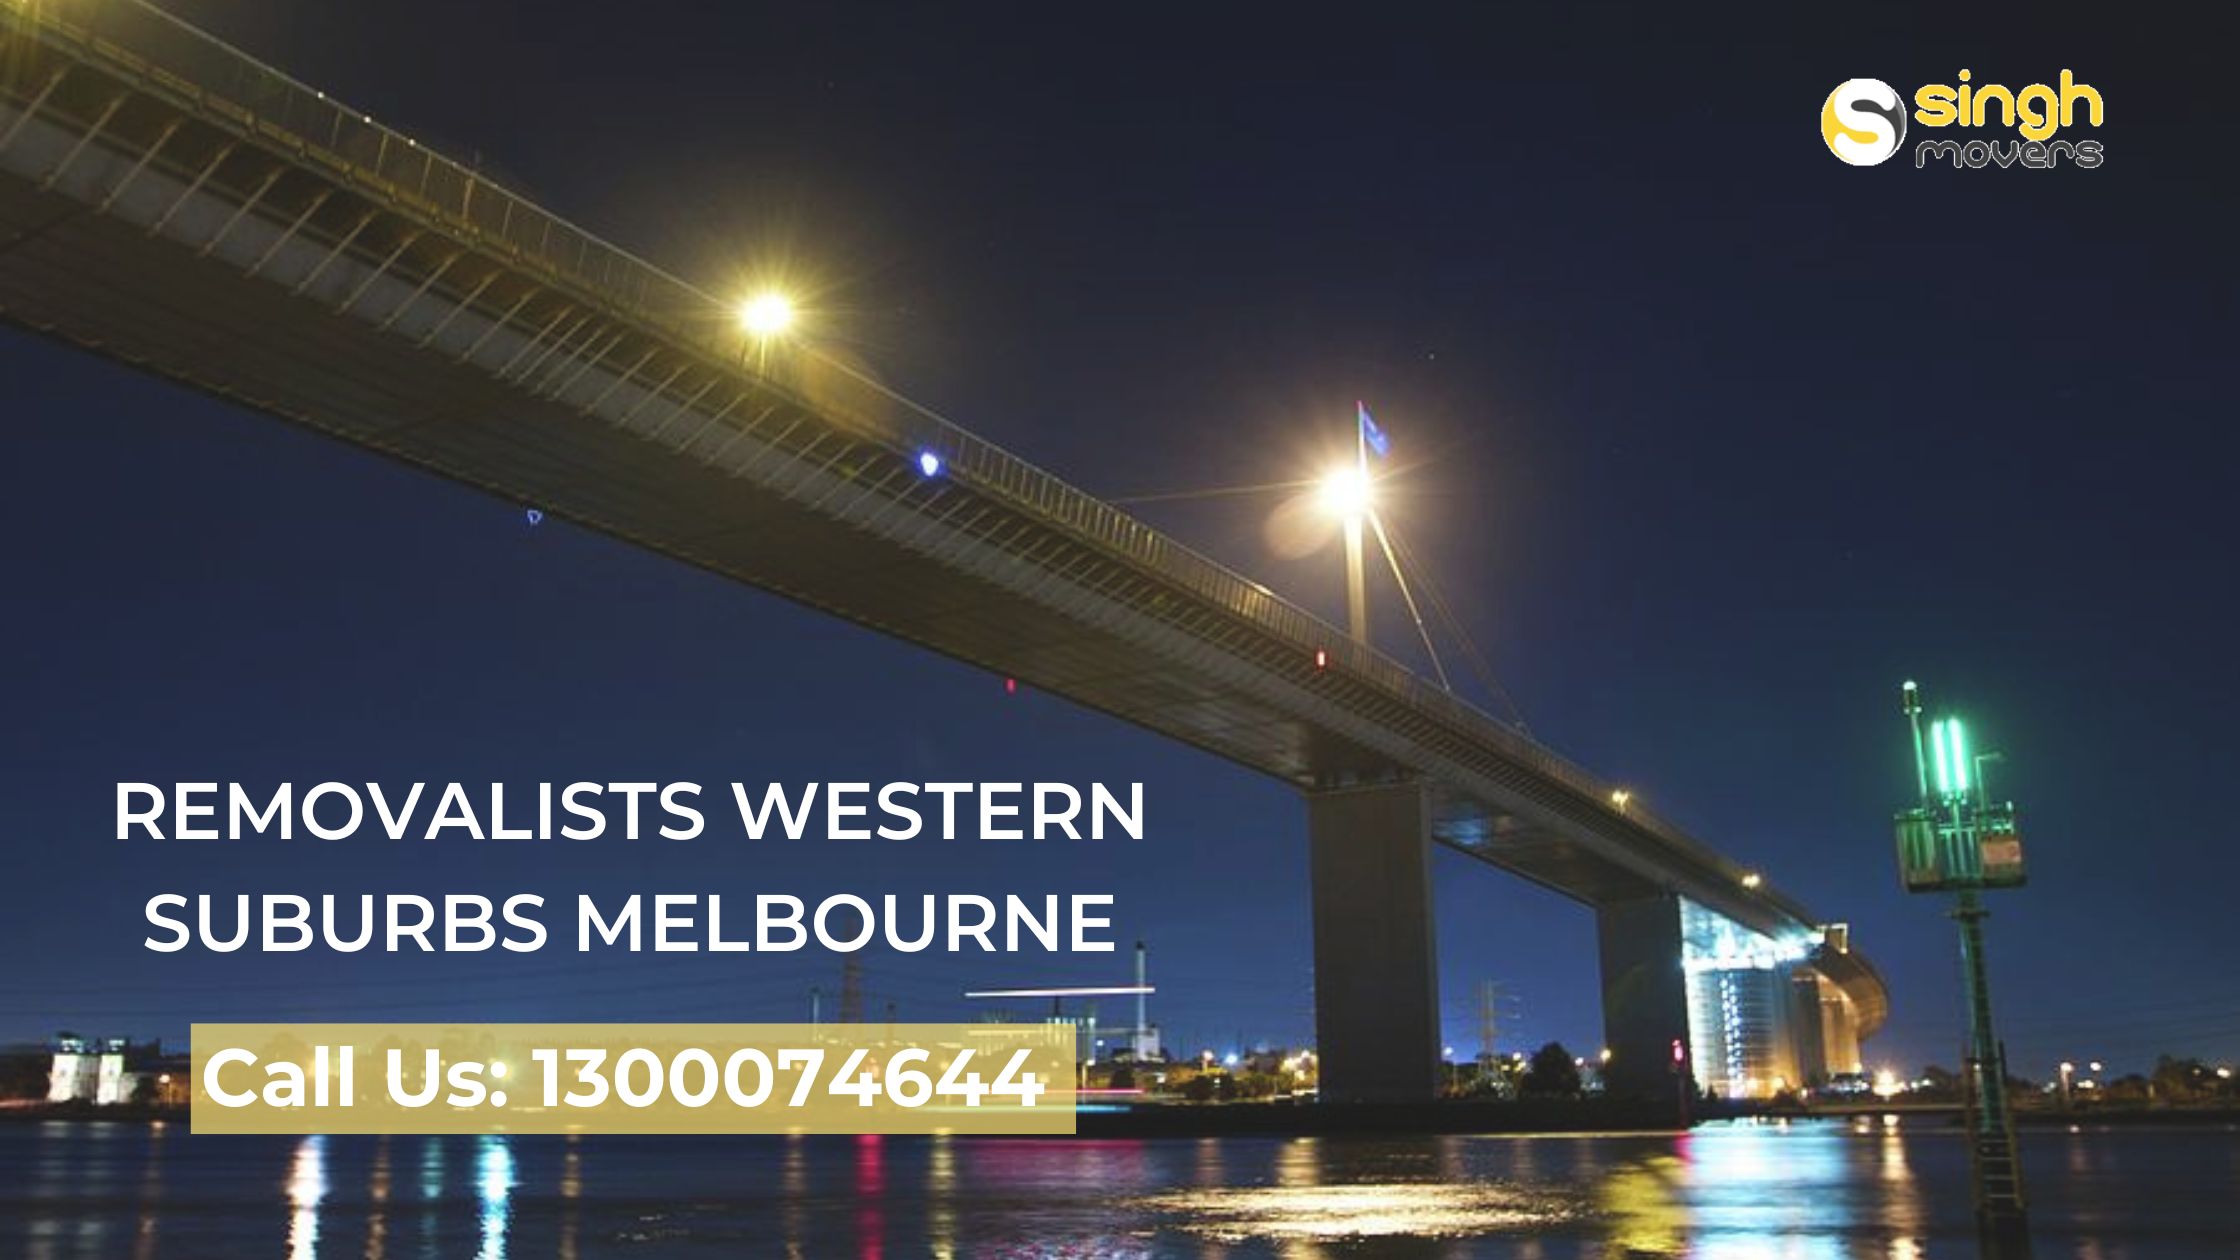 Removalists western suburbs Melbourne